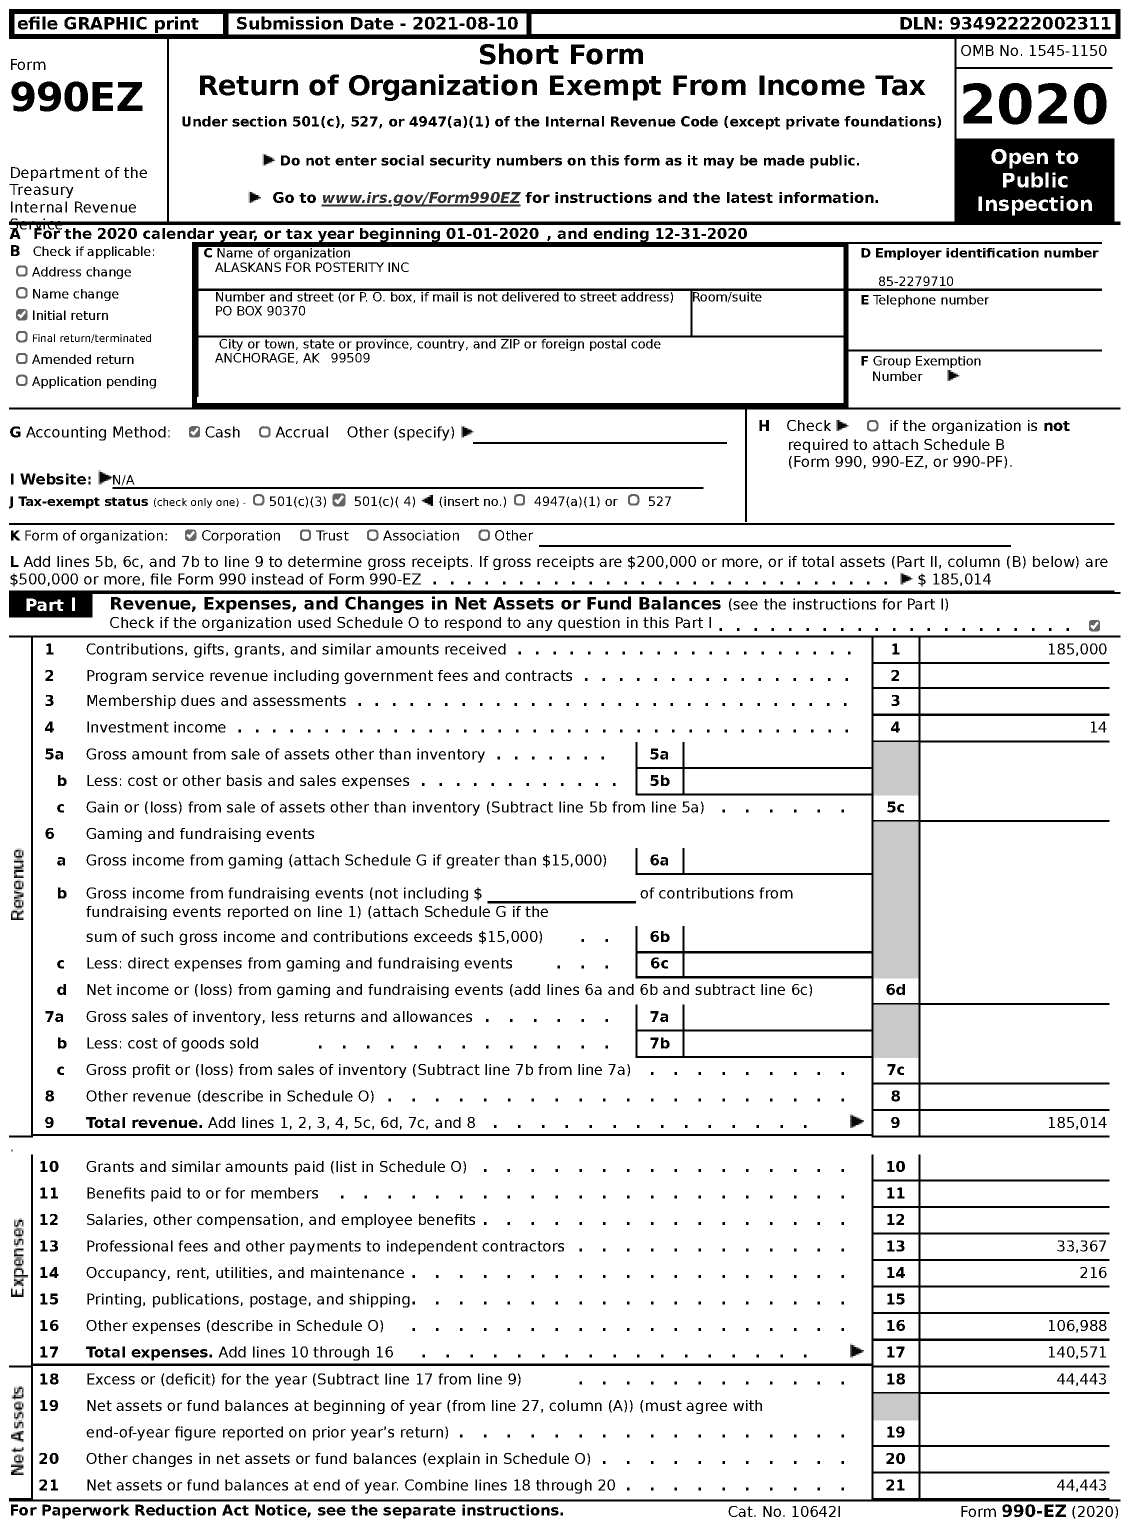 Image of first page of 2020 Form 990EZ for Alaskans for Posterity